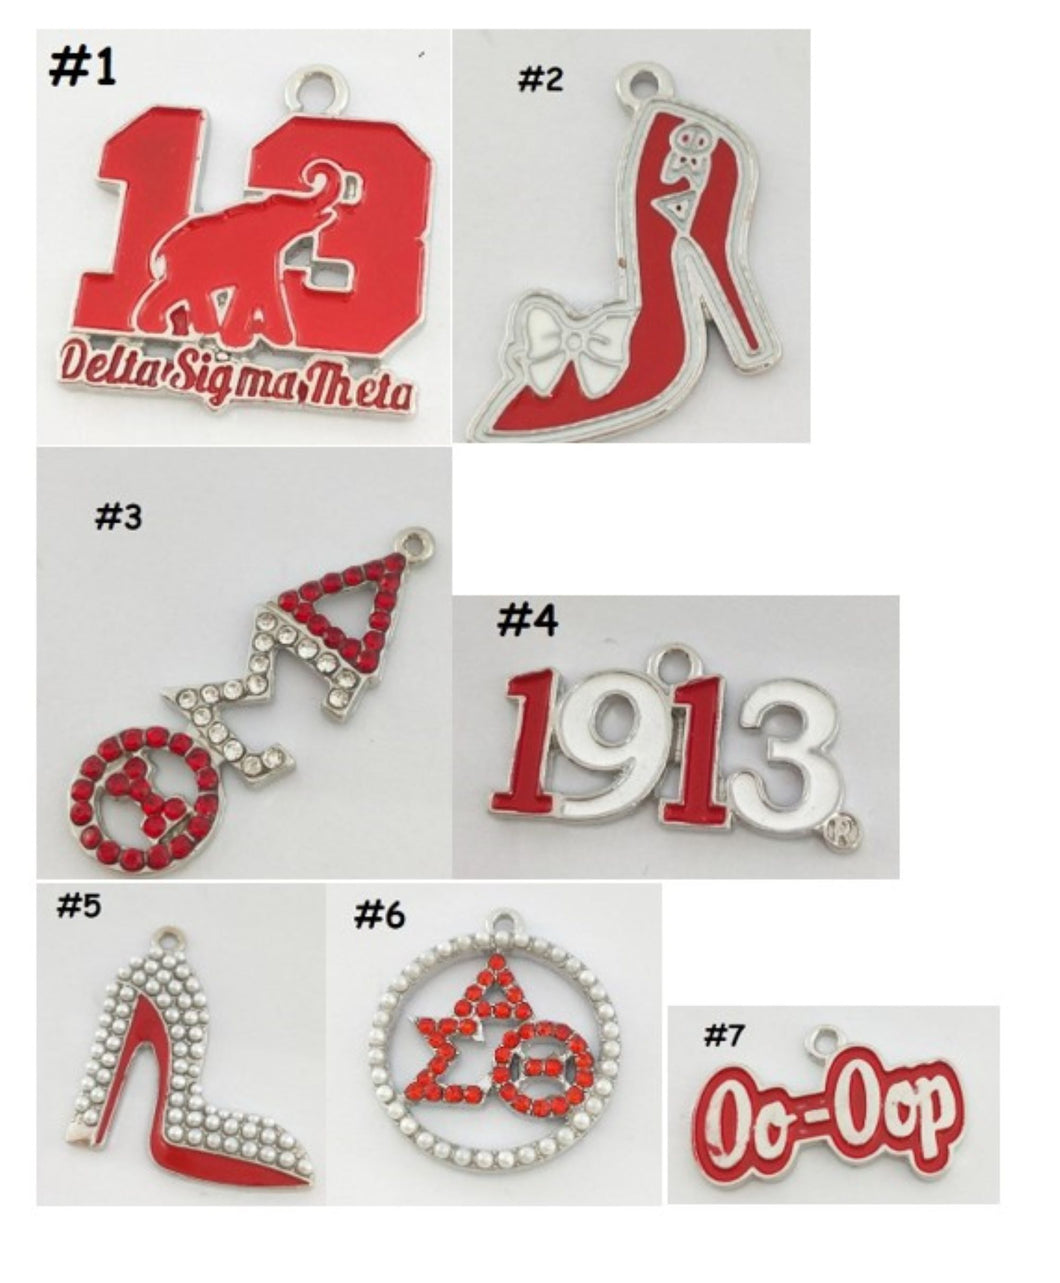 Delta Sigma Theta Individual Charms for Bracelets & Necklaces